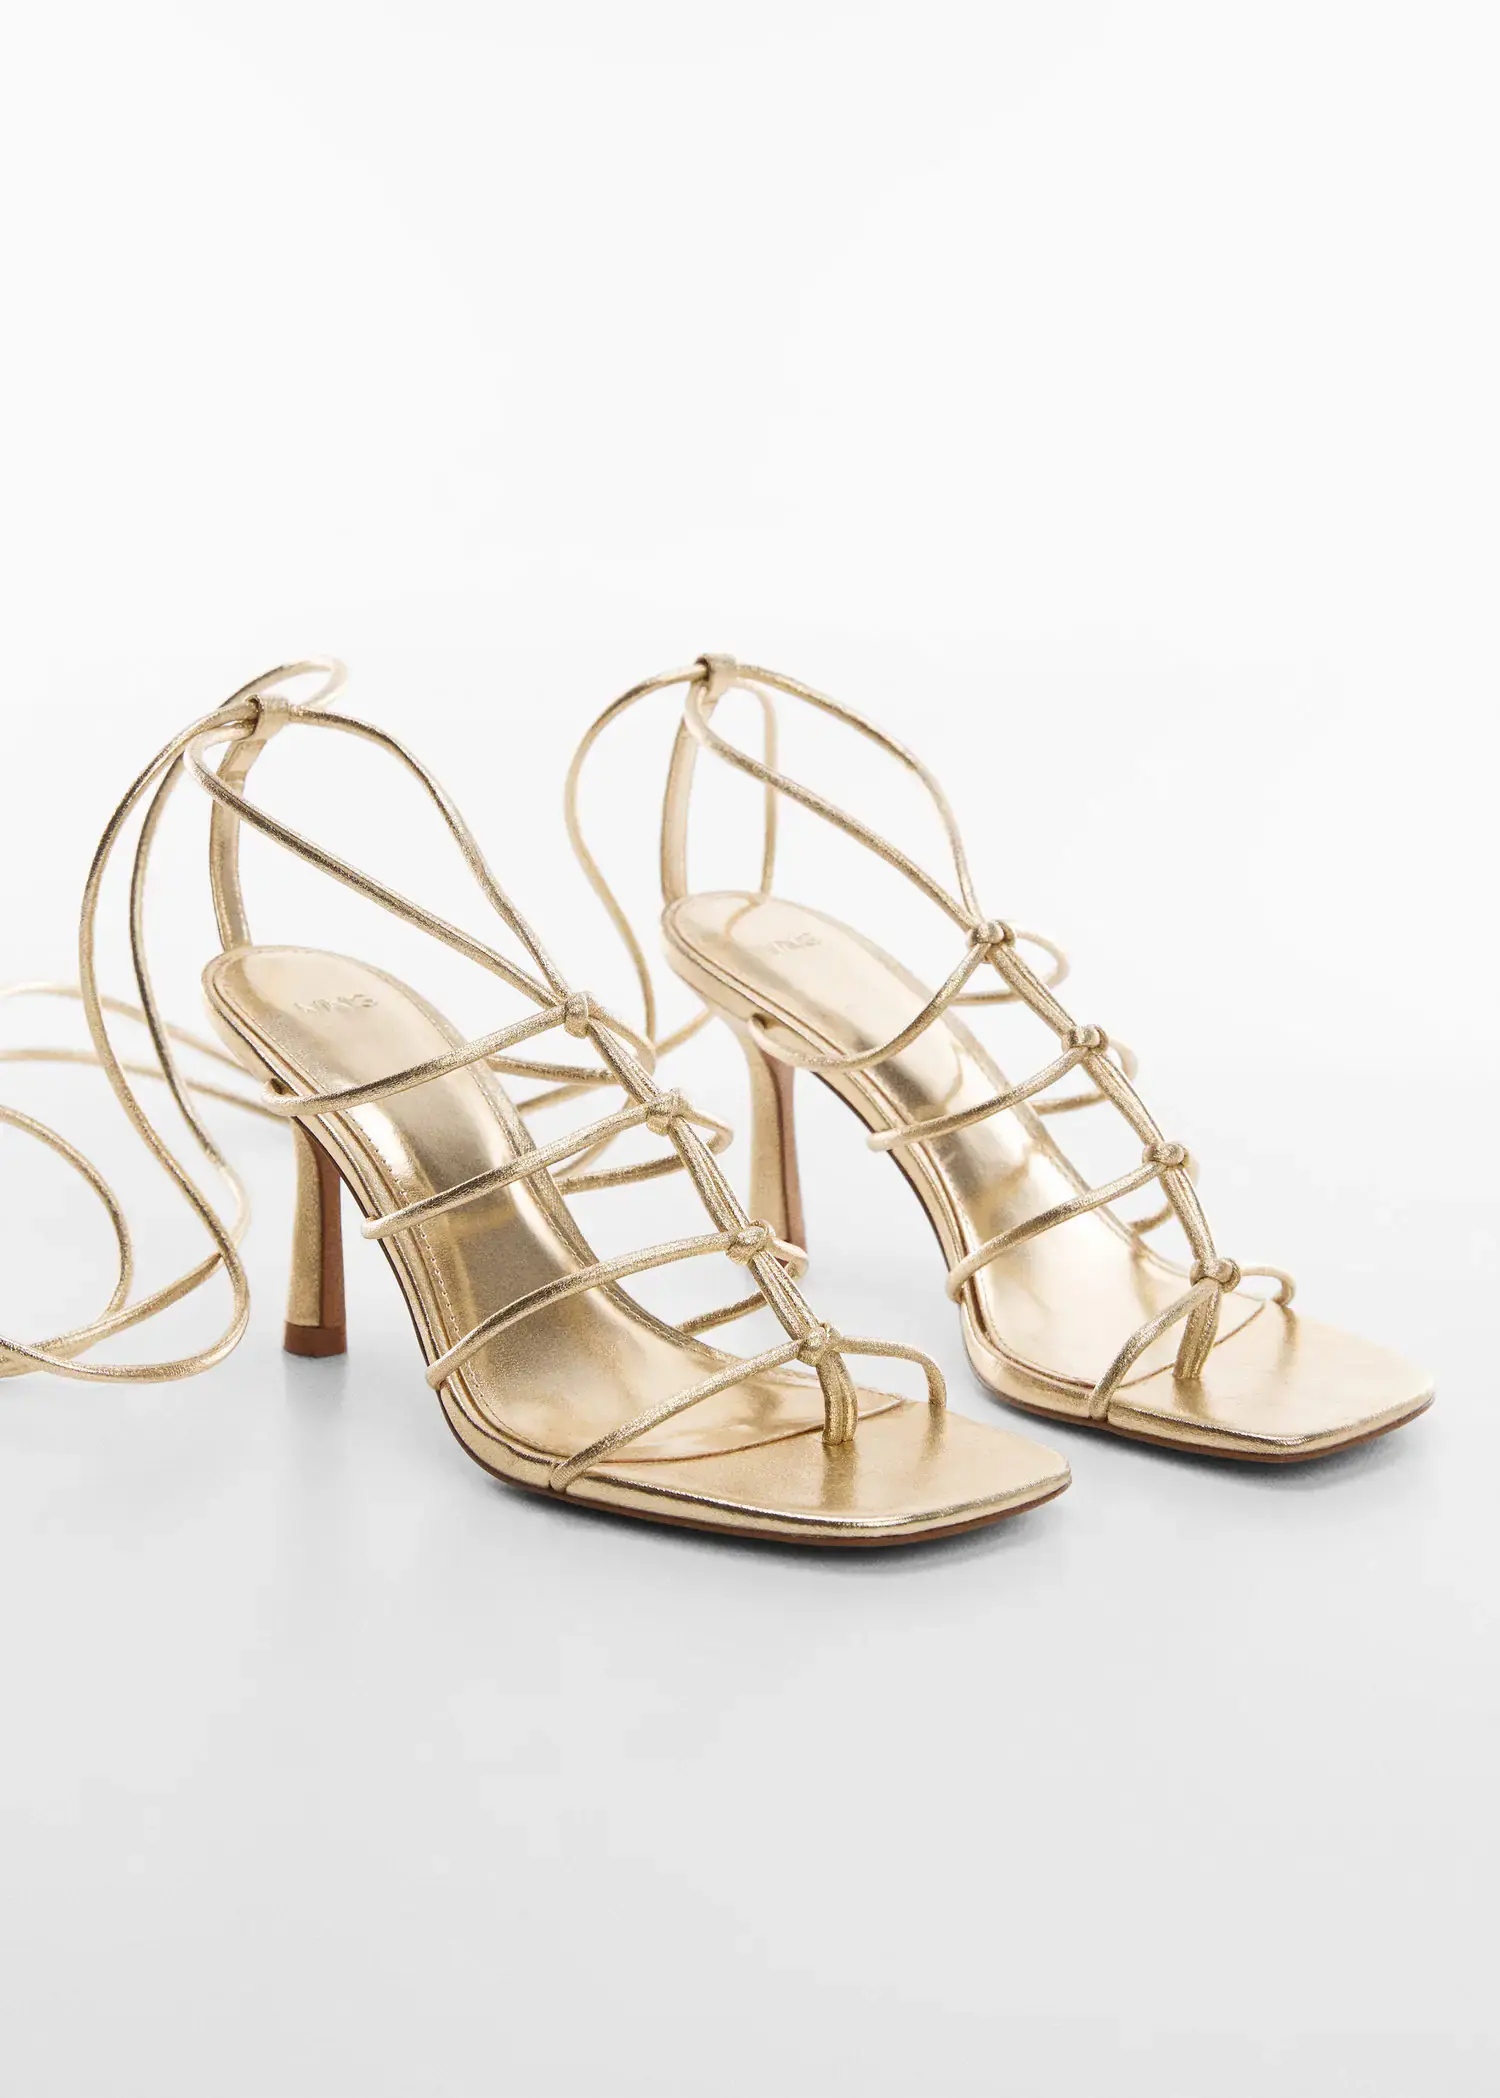 Mango Metallic strappy heeled sandal. a close up of a pair of high heel shoes 